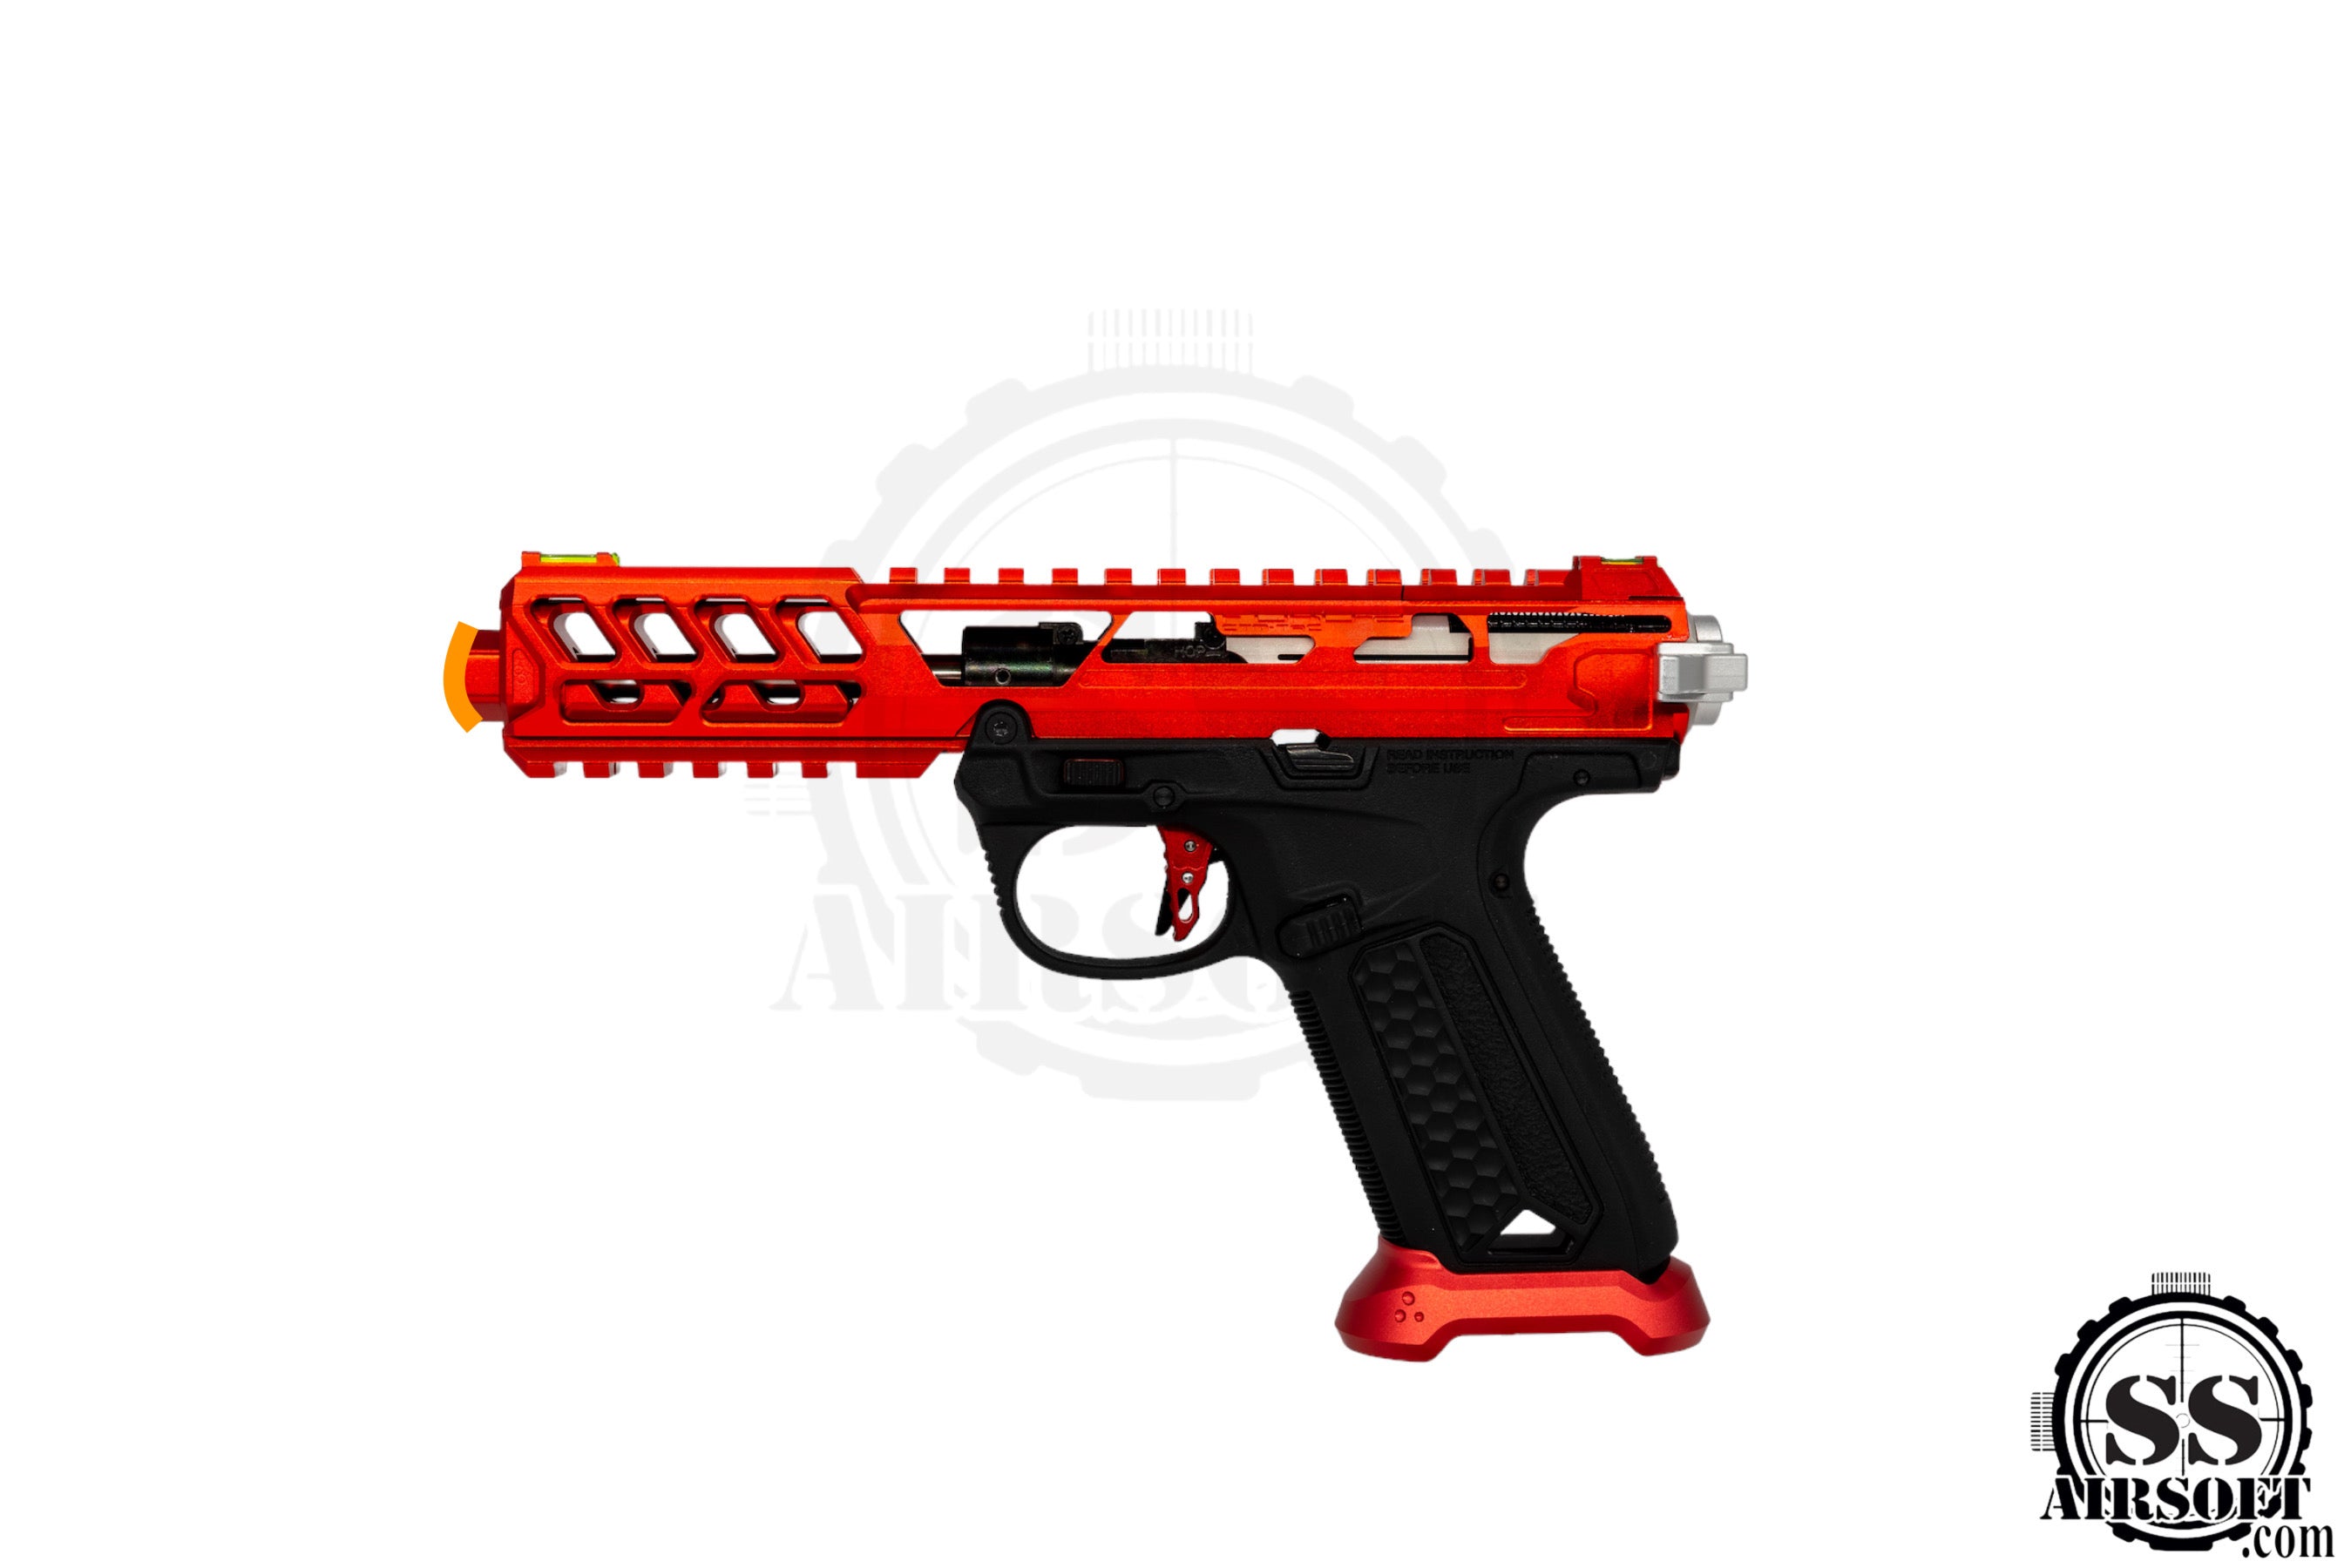 SS Airsoft Custom AAP01 - Red Rider - ssairsoft.com